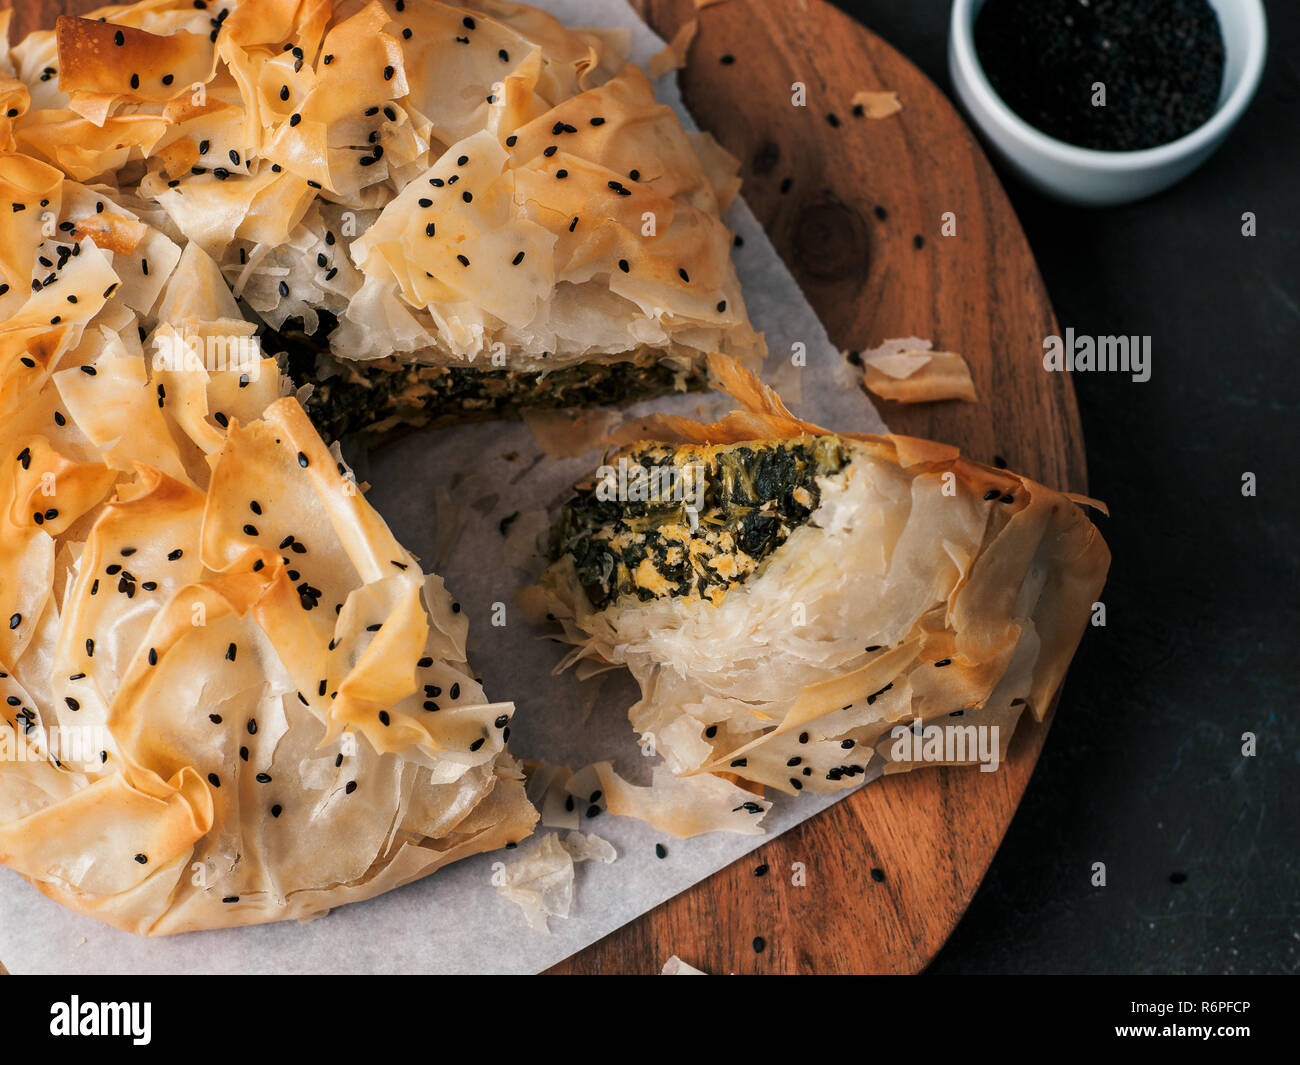 Greek pie spanakopita on dark background. Ideas and recipes for vegetarian or vegan Spanakopita Spinach Pie from fillo pastry cut in slices. Copy space. Top view or flat lay. Stock Photo